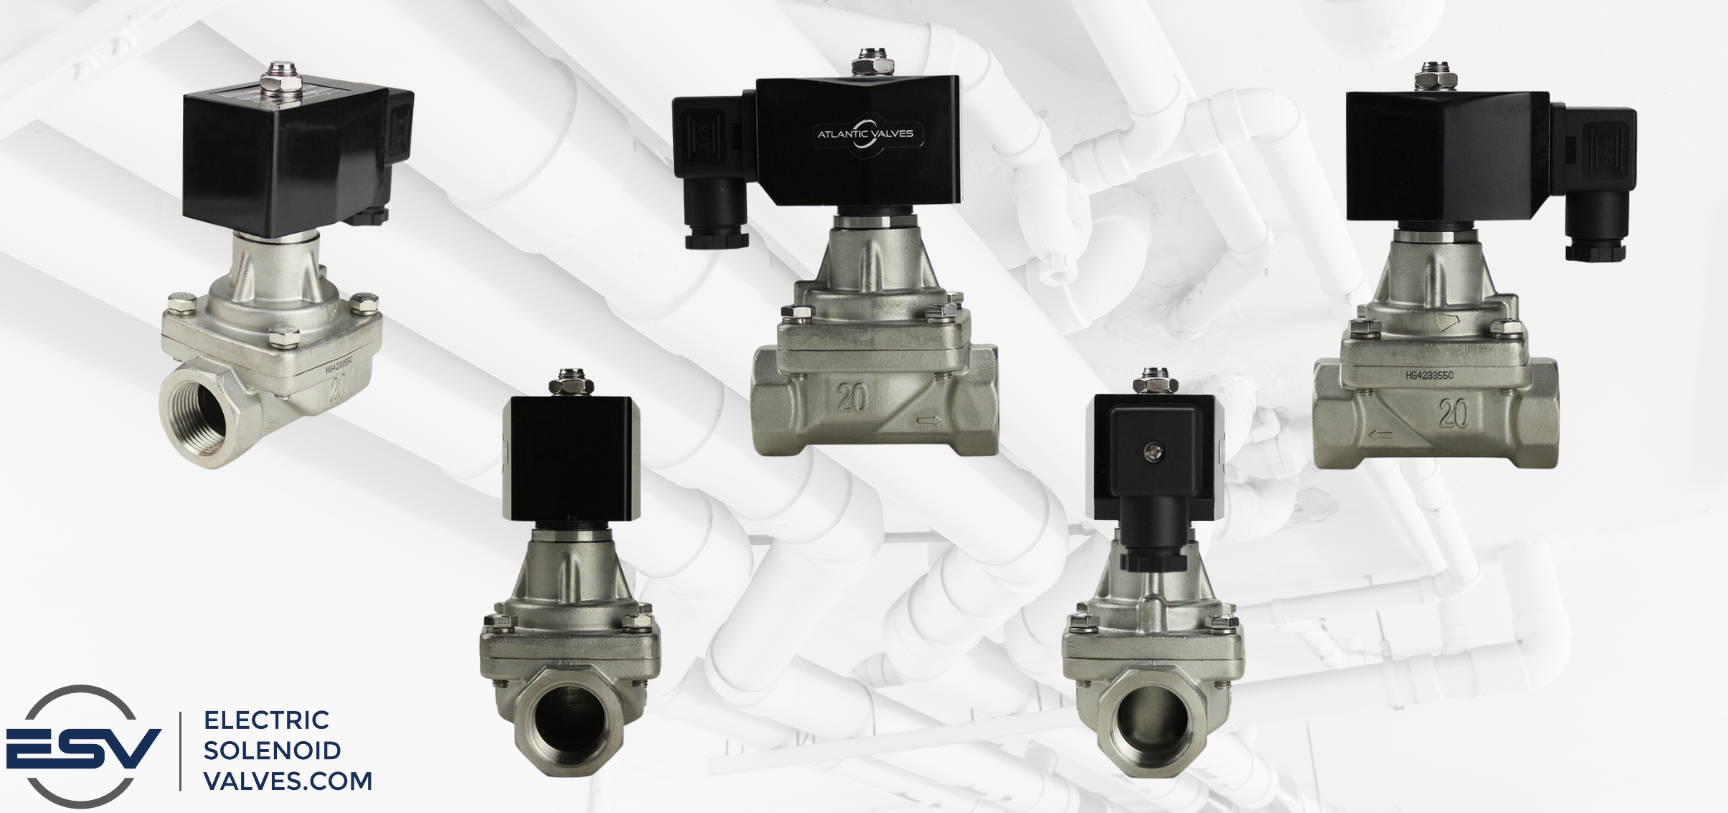 Collection of 3/4 inch stainless steel steam solenoid valves from ElectricSolenoidValves.com, showcasing durability and suitability for optimizing performance in food processing systems